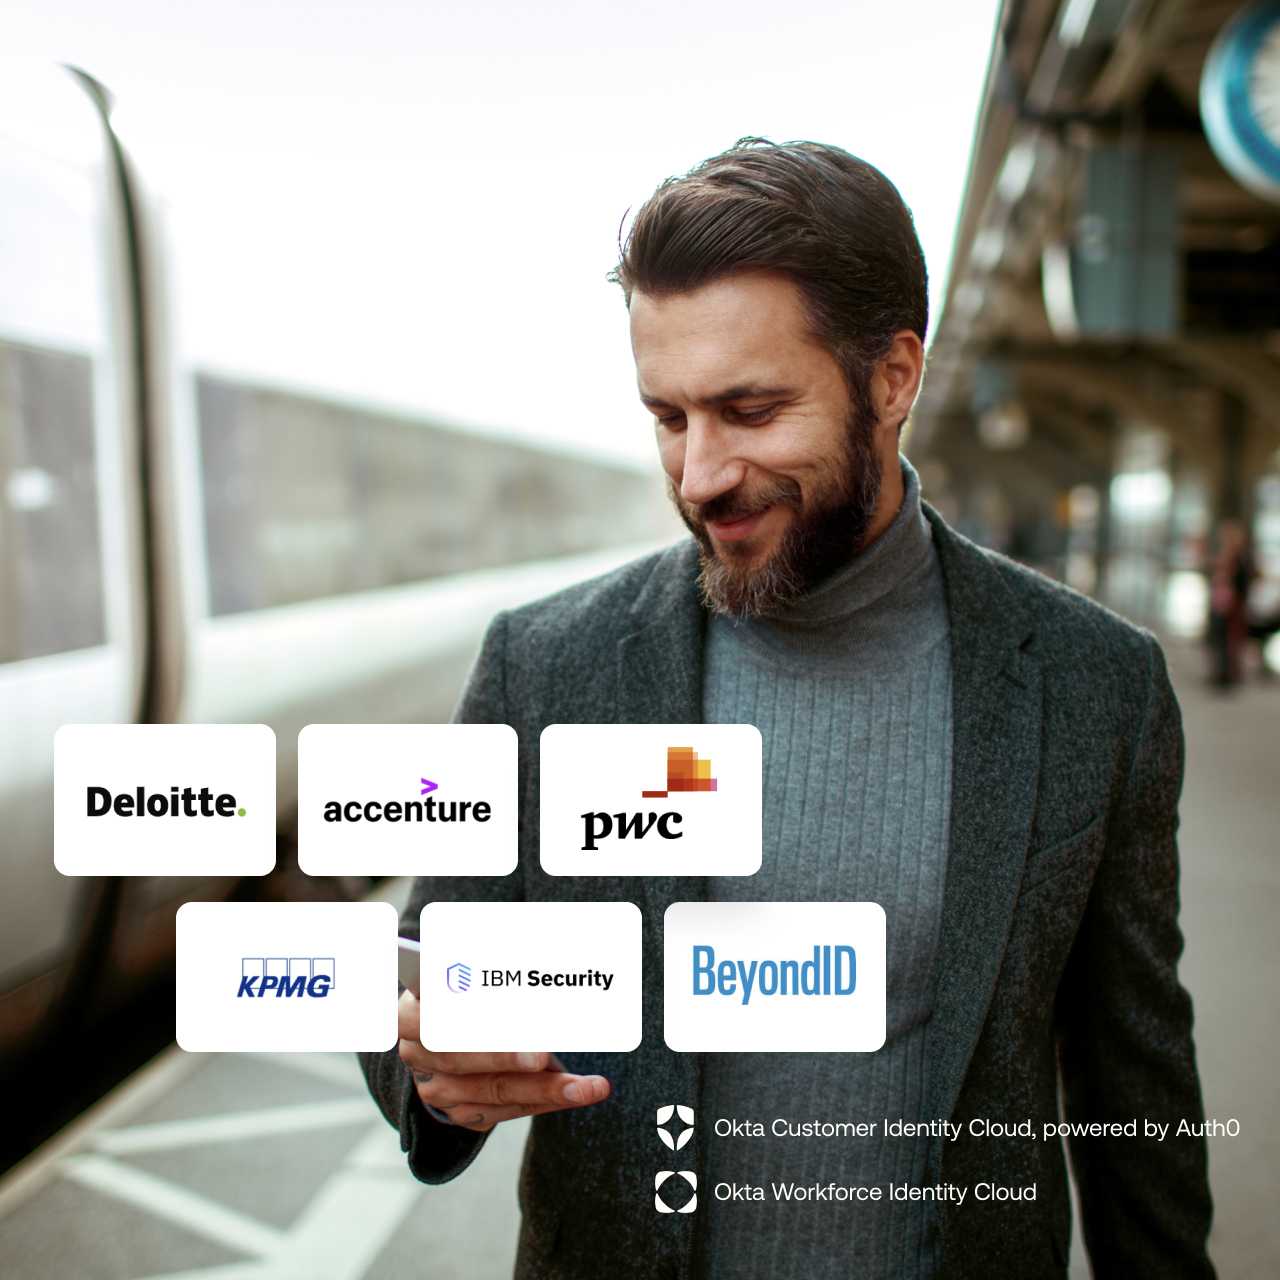 Man in blazer looking down at phone while walking on train platform with company logos transposed on top of photo